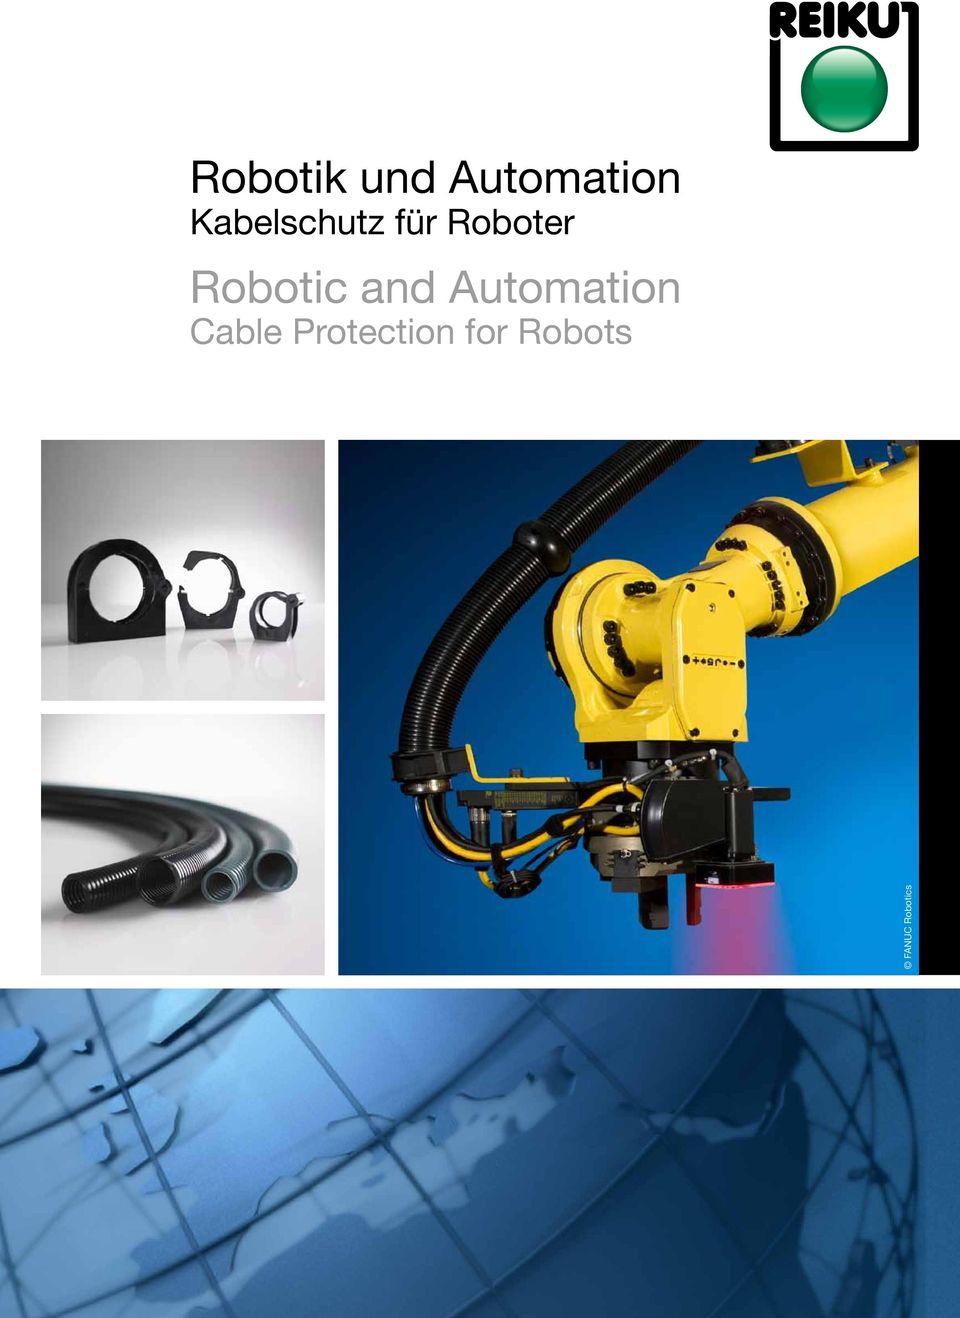 Robotic and Automation